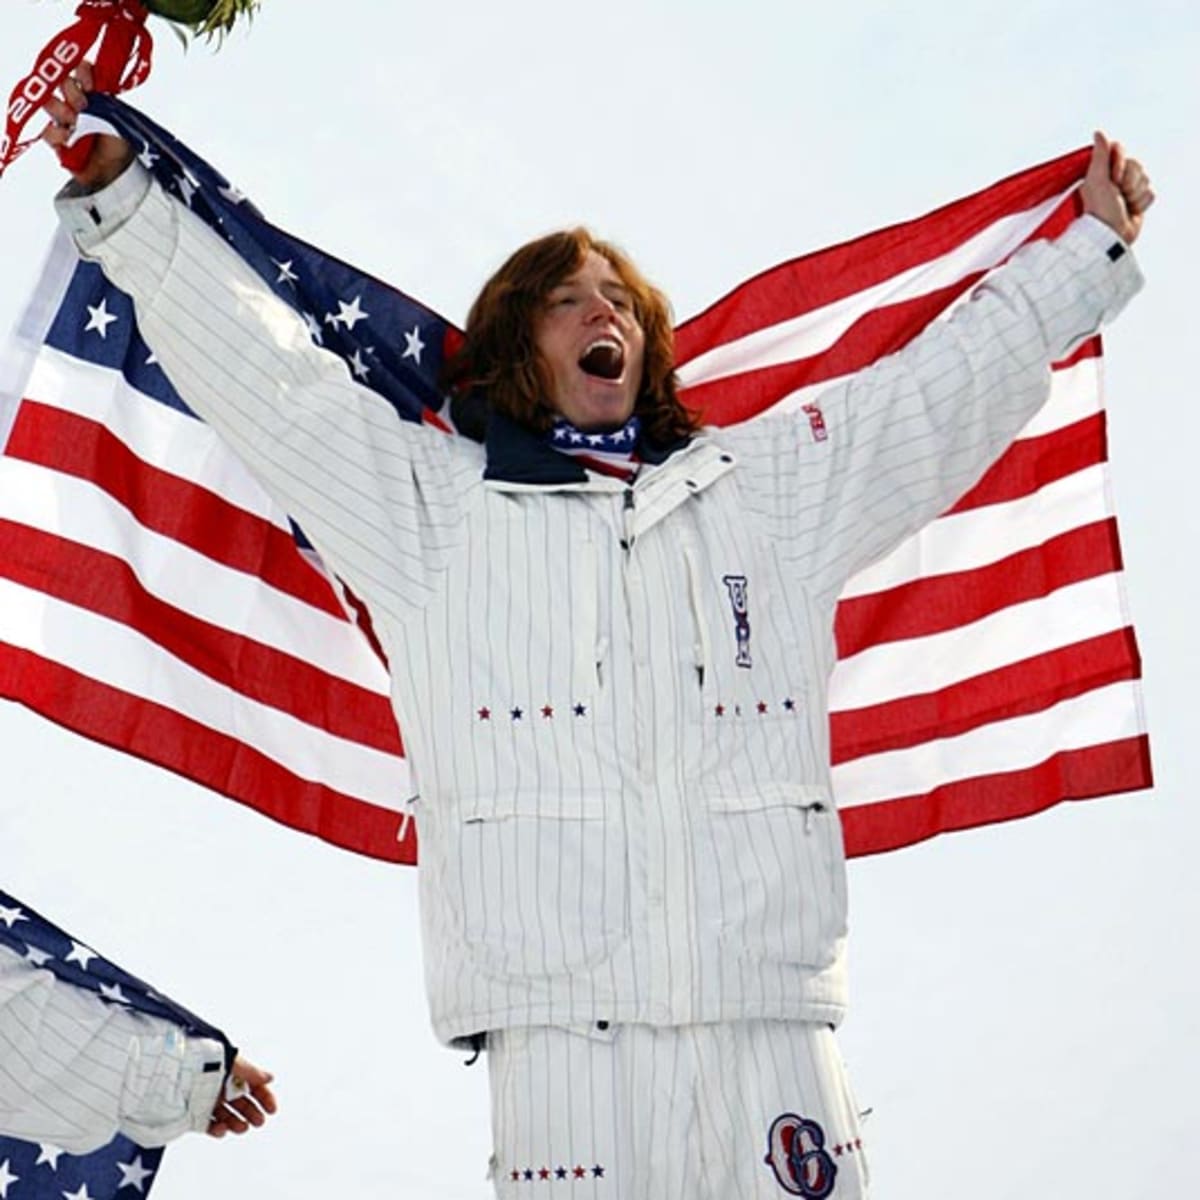 Beijing Olympics How to watch Shaun White live stream, TV channel, start time